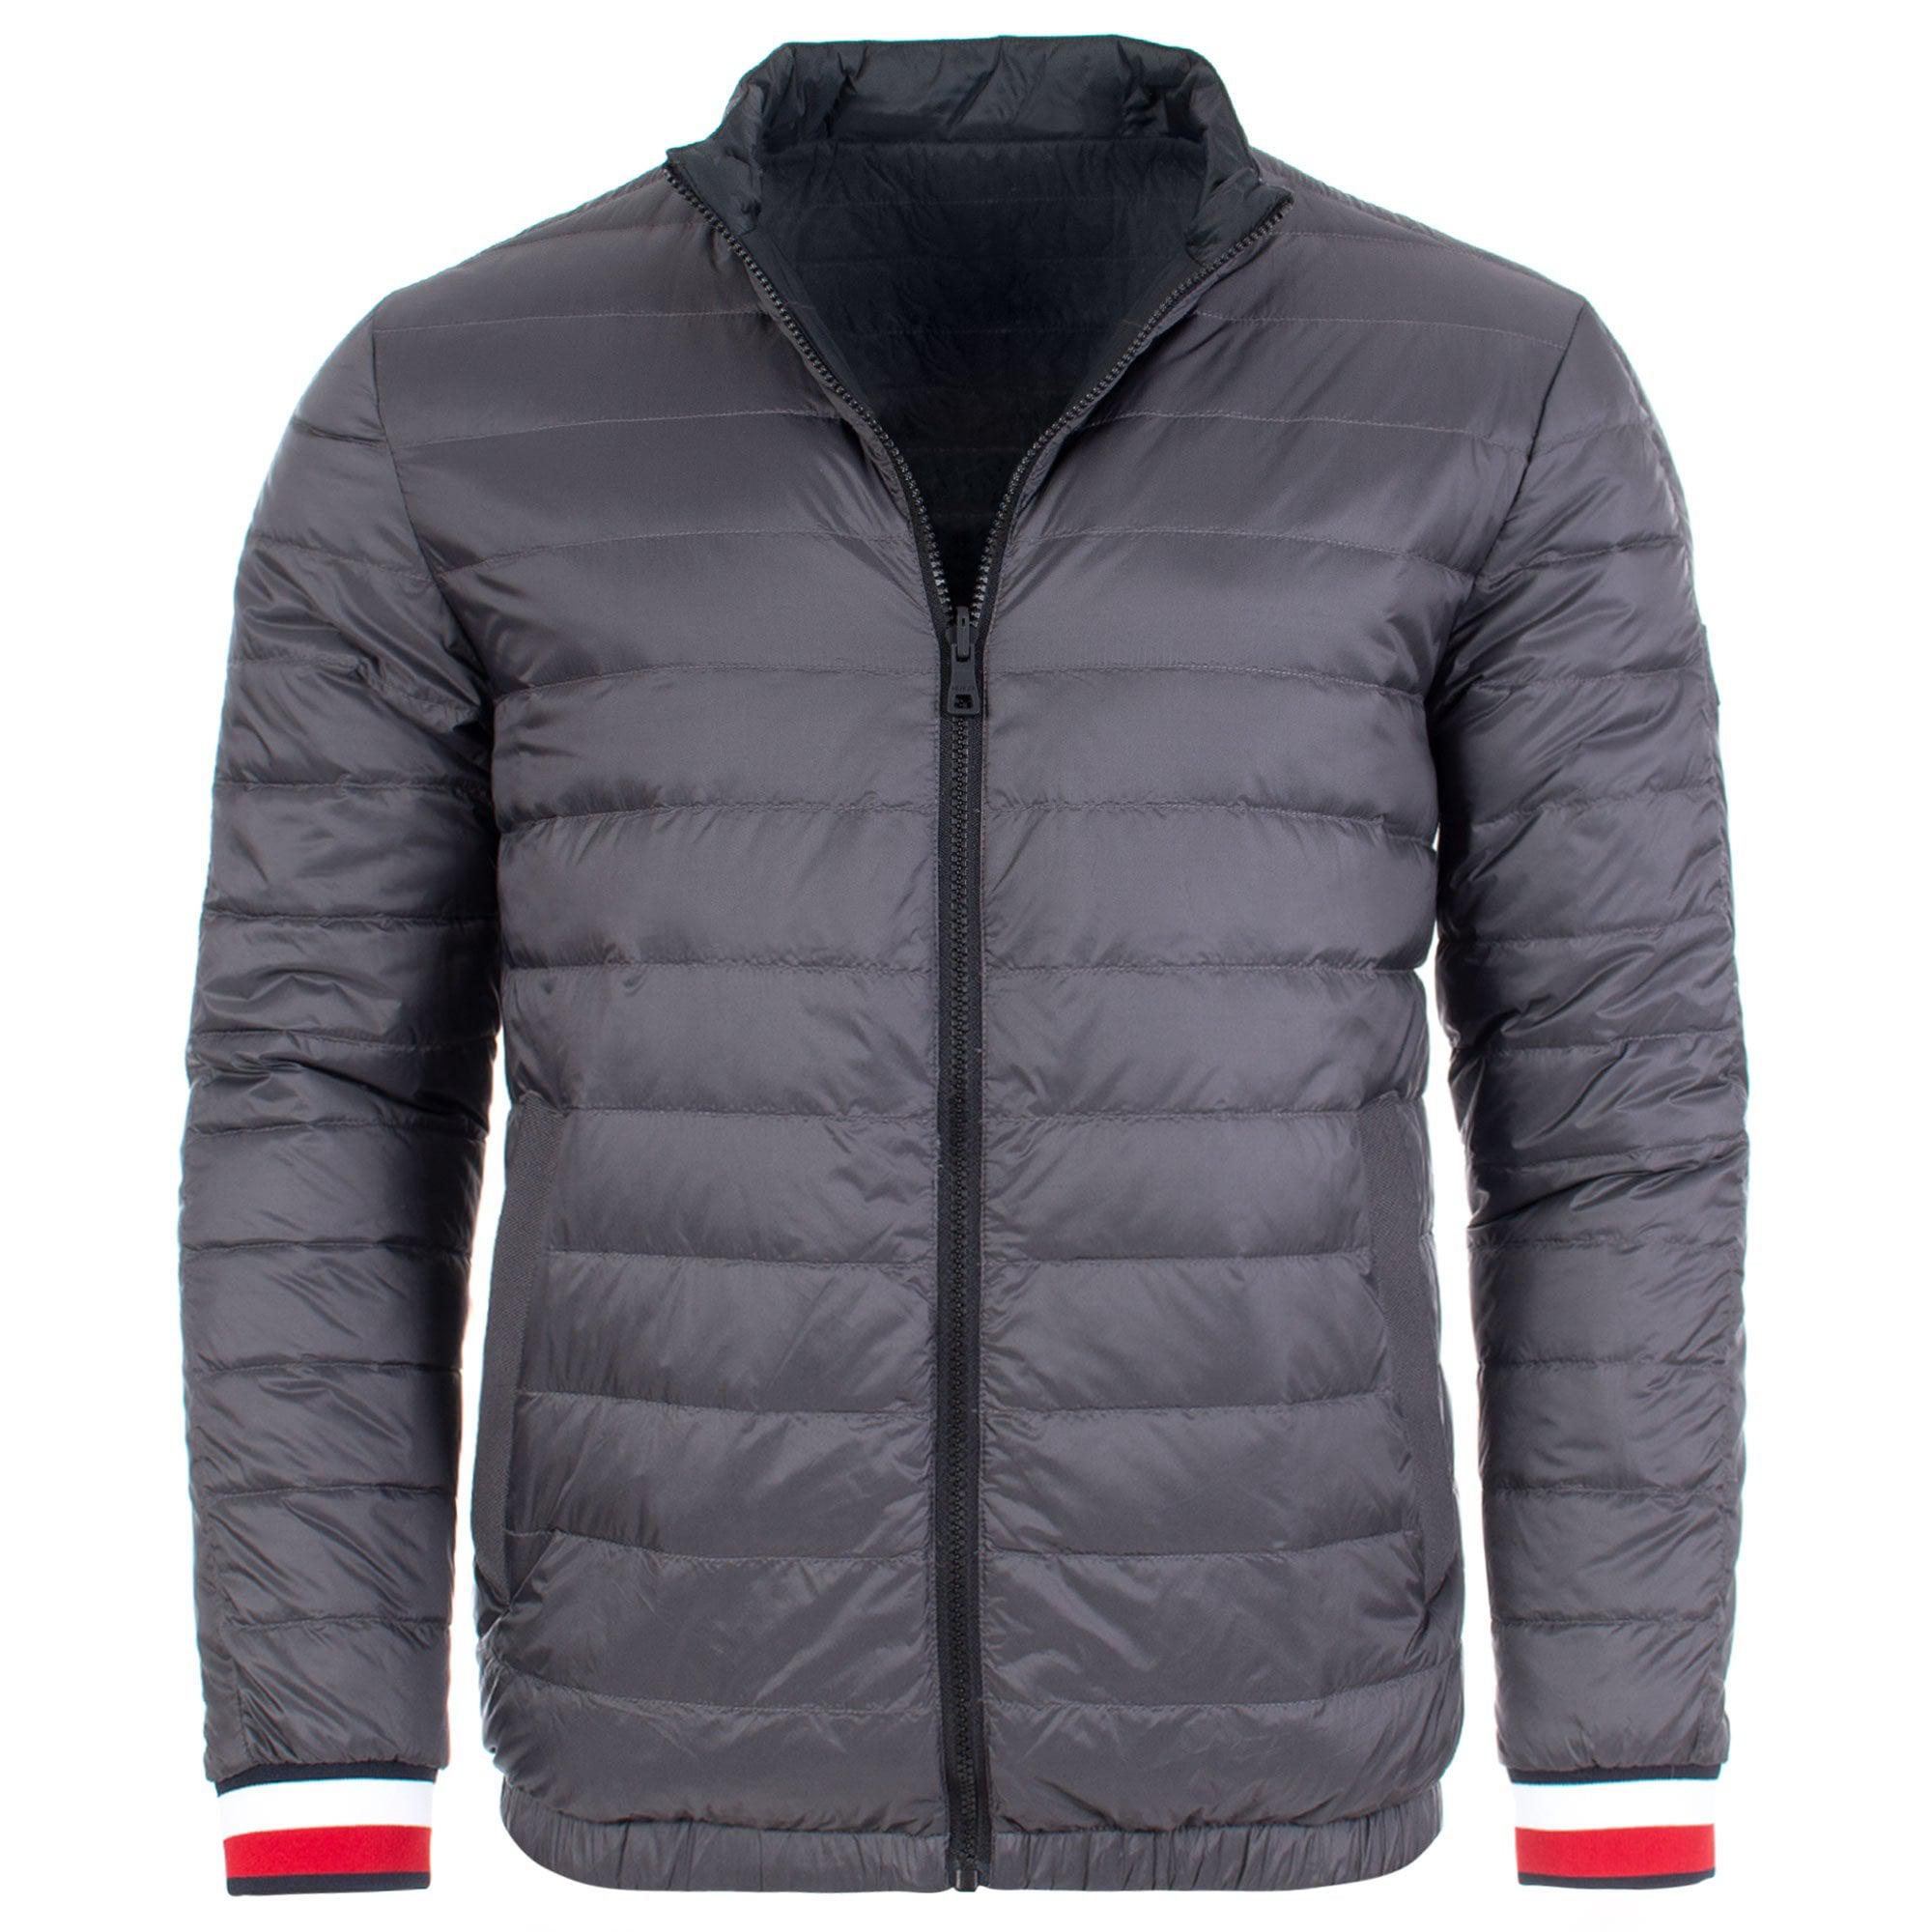 tommy hilfiger reversible nylon down jacket Cheaper Than Retail Price> Buy  Clothing, Accessories and lifestyle products for women & men -